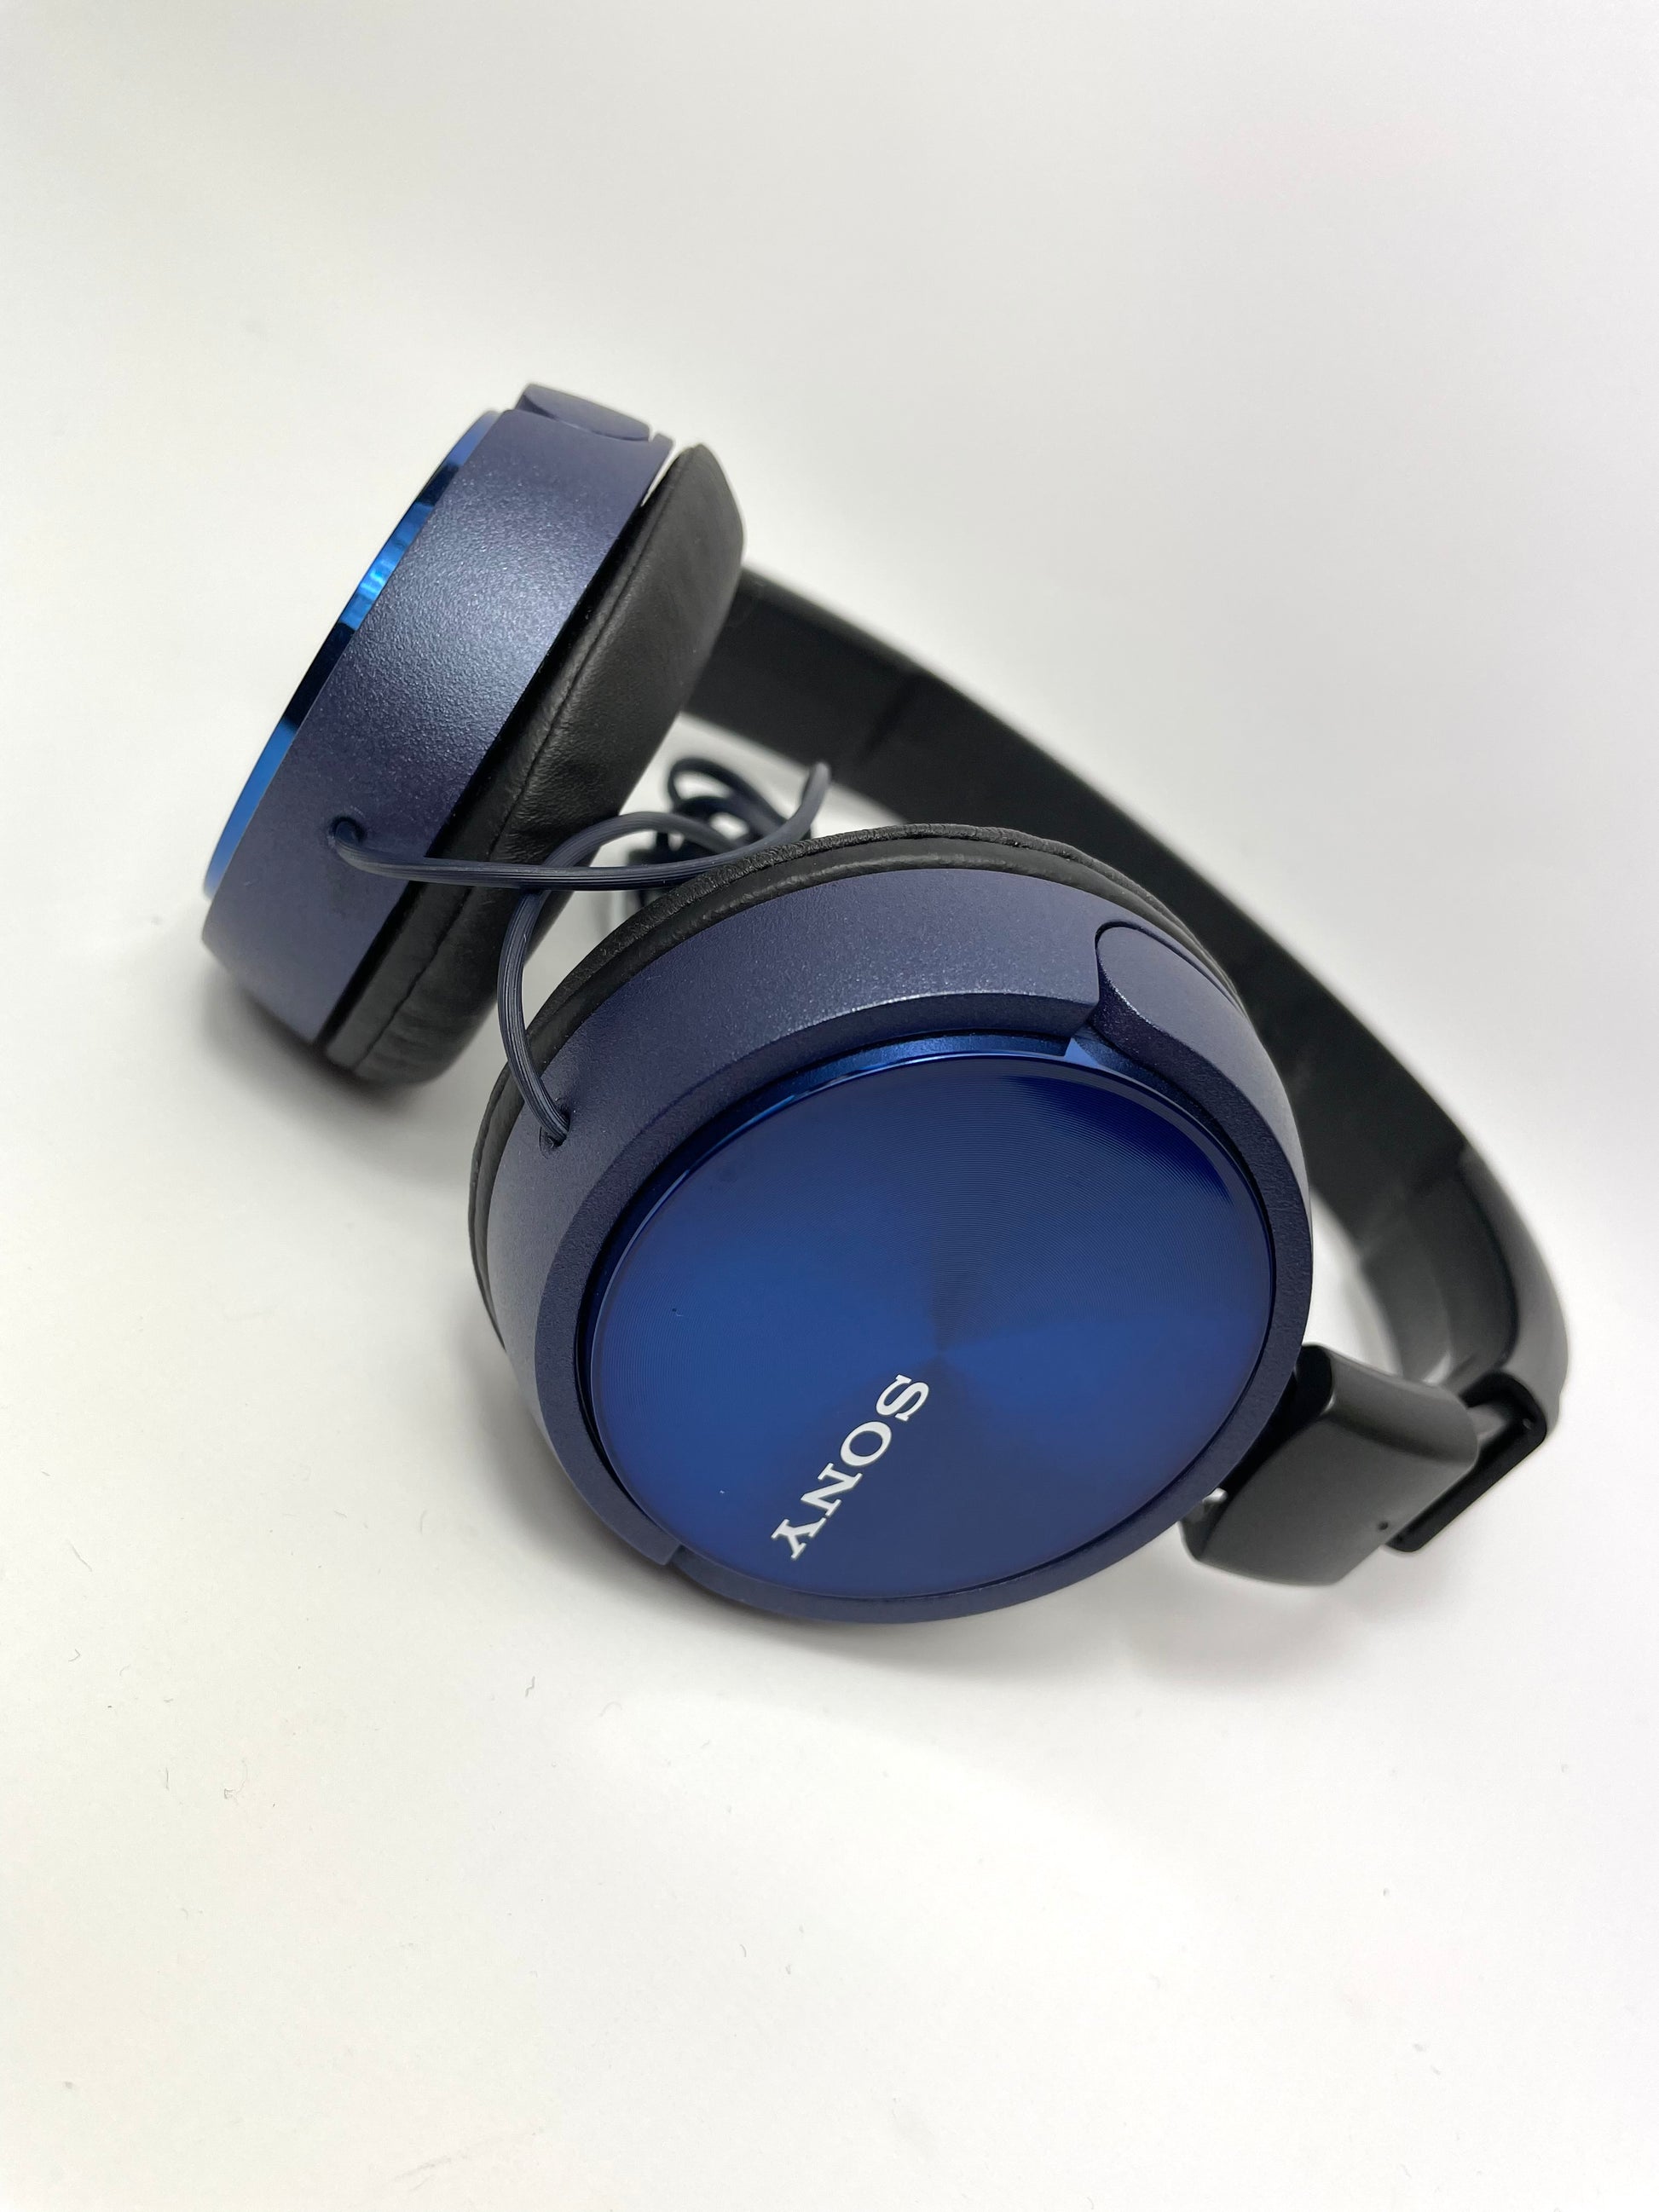 Sony Wired MDR-ZX310 On-Ear Headphones Foldable CLEARO | Designer Outlet – Microphone in with Blu